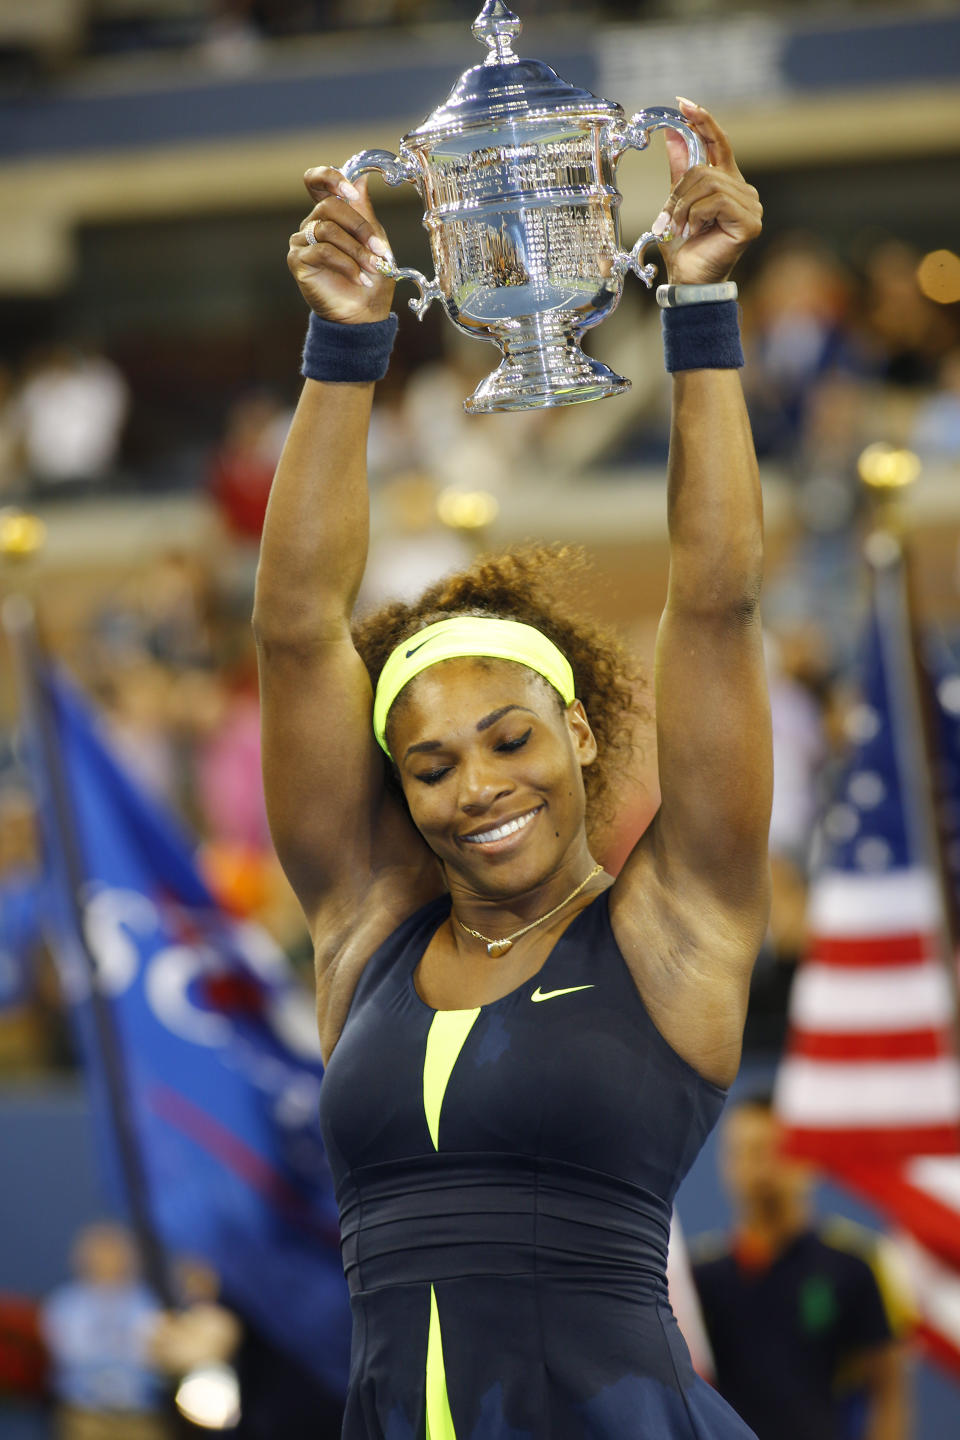 Serena Williams, USA, celebrates with the trophy after defeating Victoria Azarenka, Belarus, in the Women's SIngles Final during the US Open Tennis Tournament, Flushing, New York. USA. 9th September 2012. Photo Tim Clayton (Photo by Tim Clayton/Corbis via Getty Images)